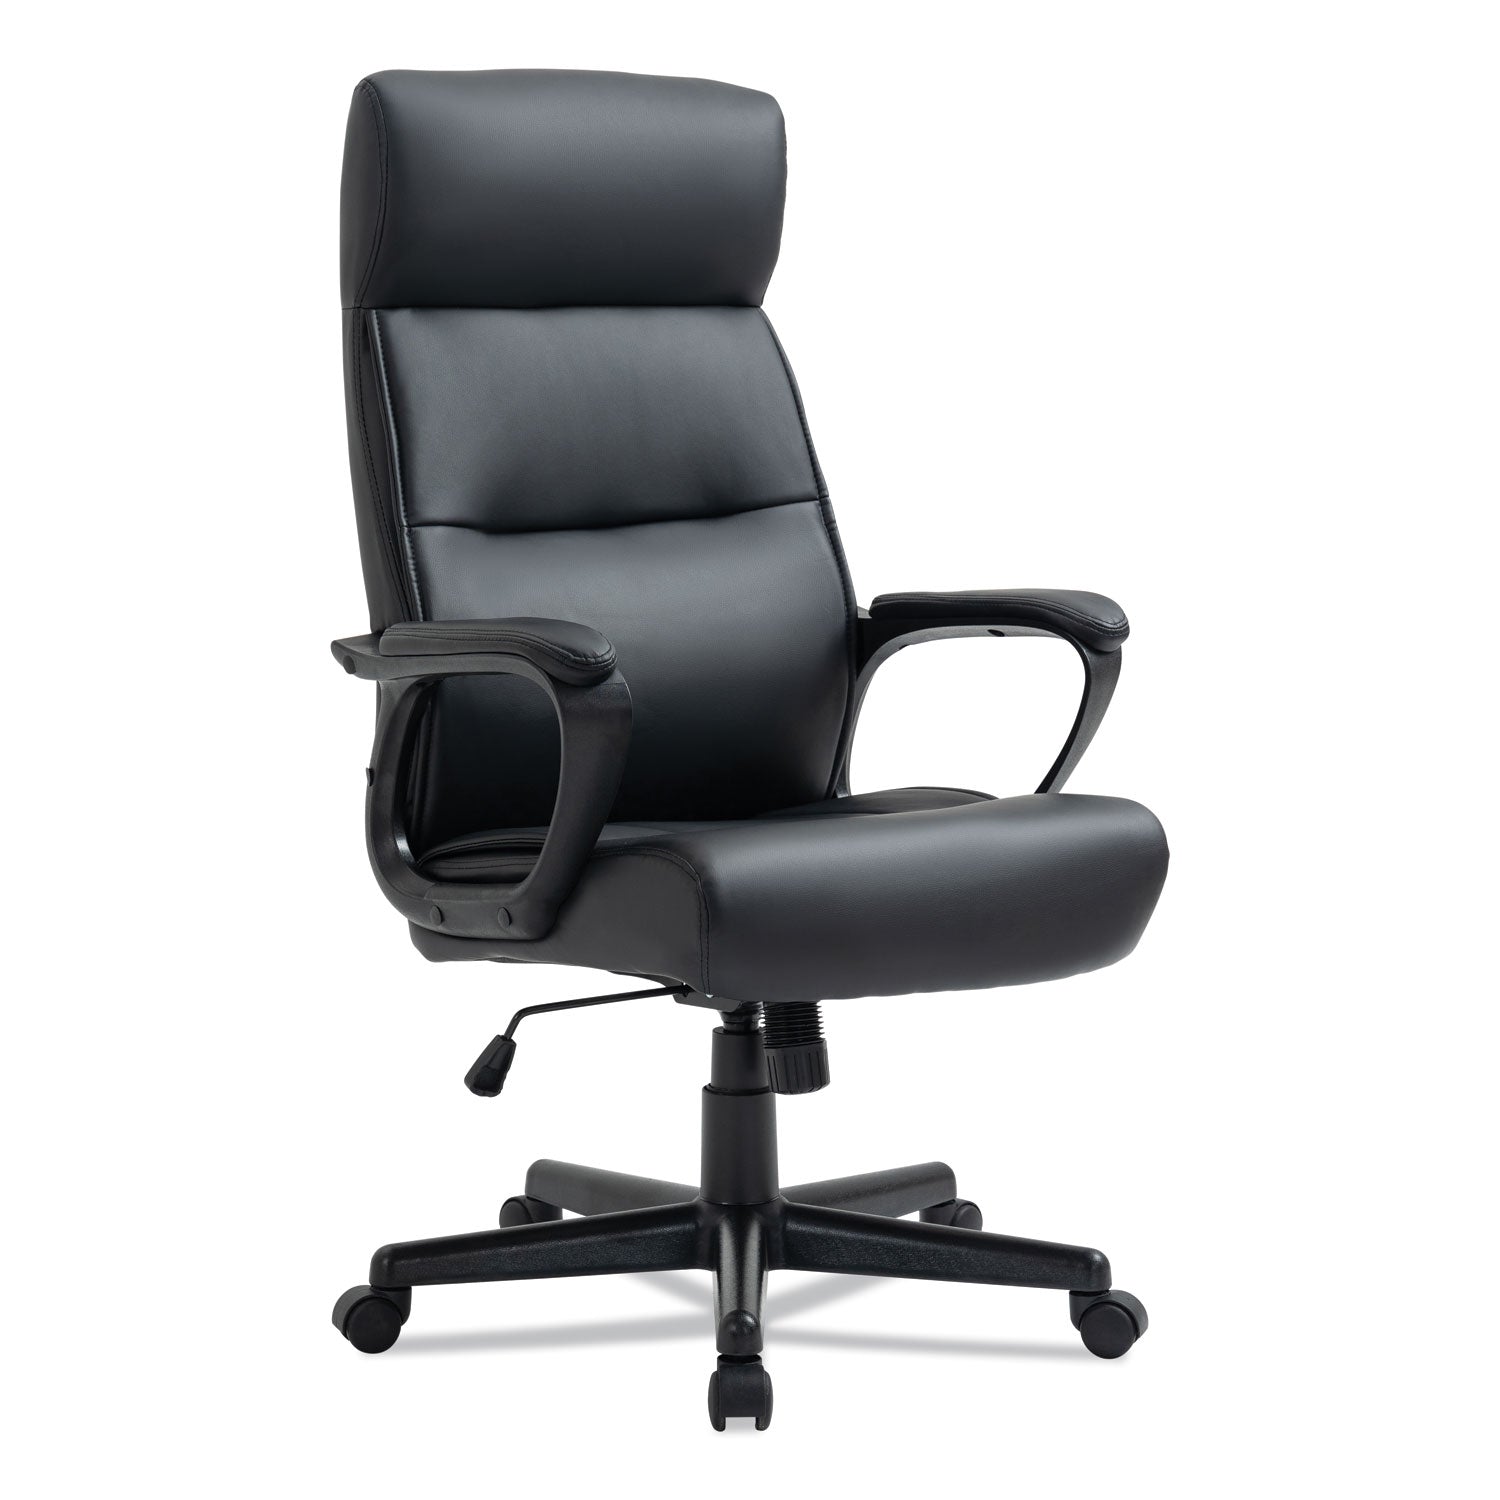 alera-oxnam-series-high-back-task-chair-supports-up-to-275-lbs-1756-to-2138-seat-height-black-seat-back-black-base_aleon41b19 - 1